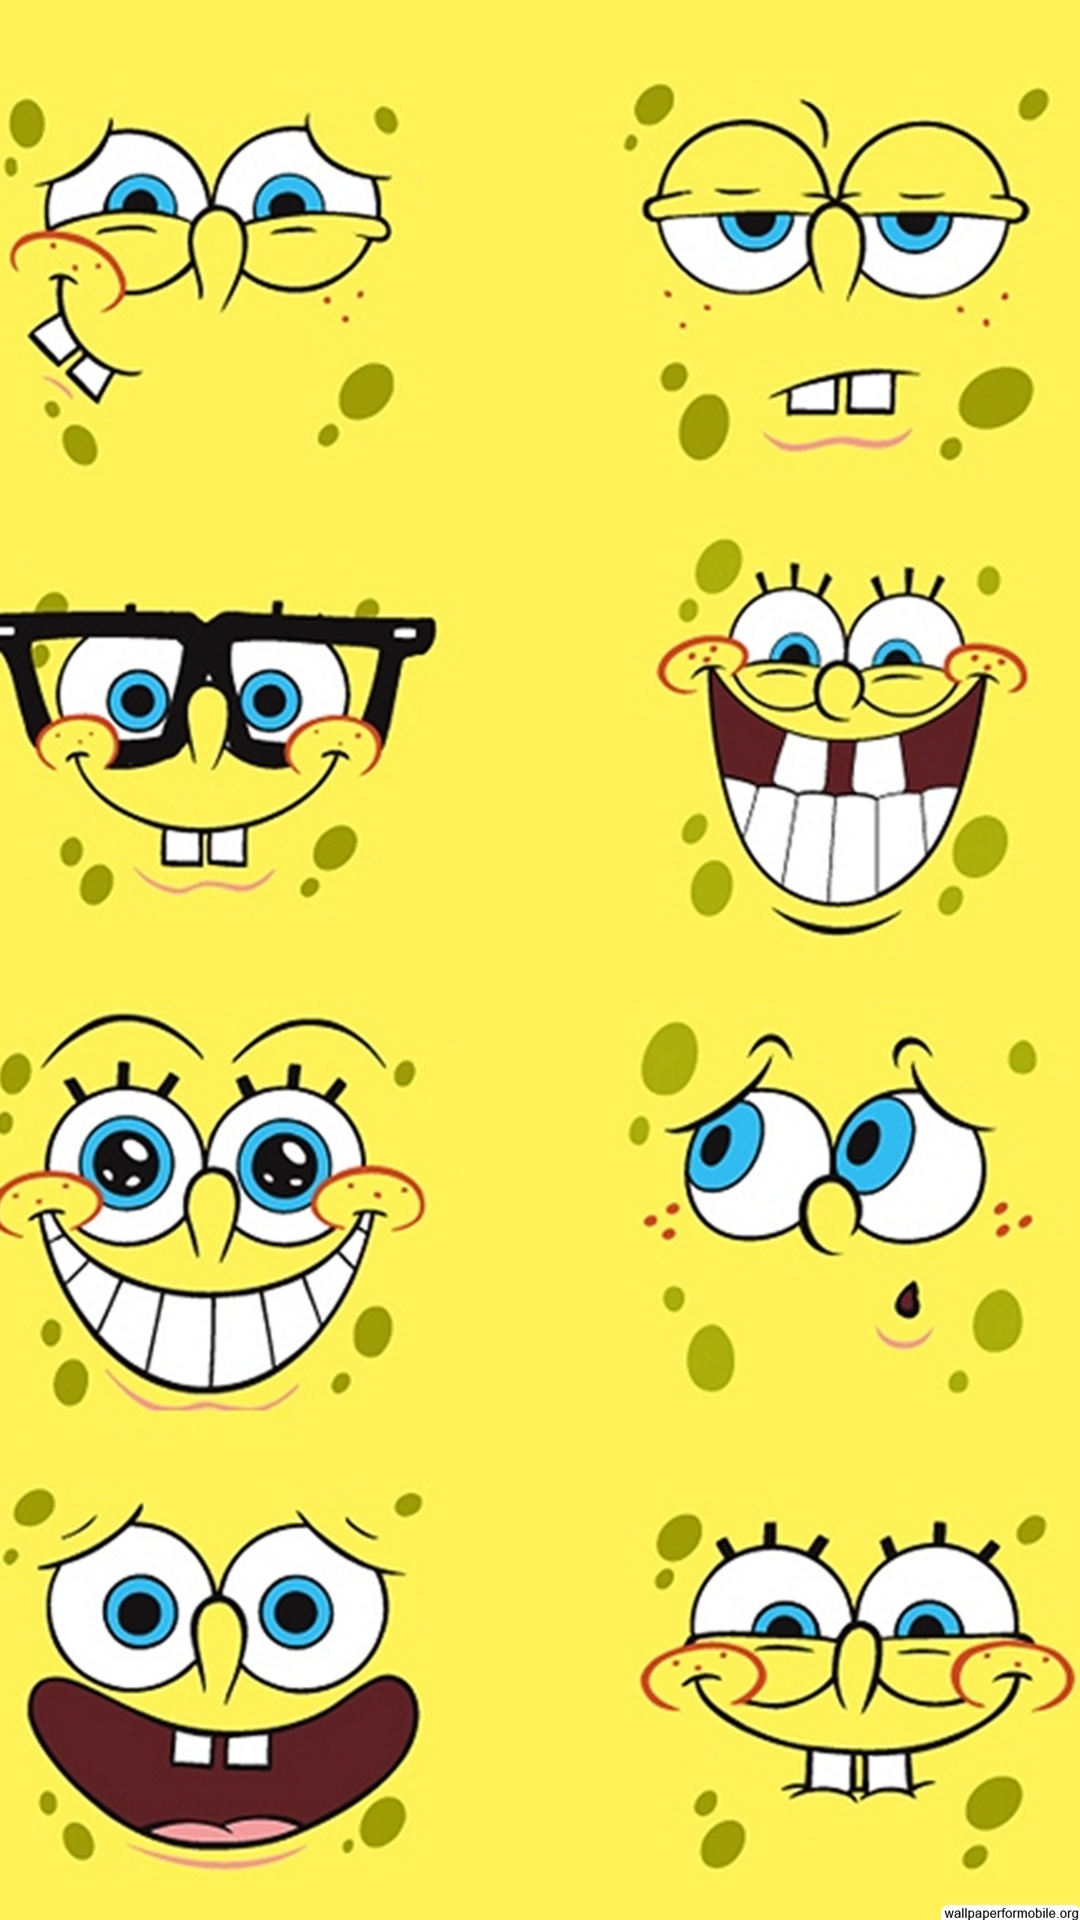 Free Download Free Download Spongebob Squarepants Wallpapers For Iphone 7 Iphone 1080x19 For Your Desktop Mobile Tablet Explore 57 Spungbob Supreme Iphone Wallpaper Spungbob Supreme Iphone Wallpaper Supreme Iphone